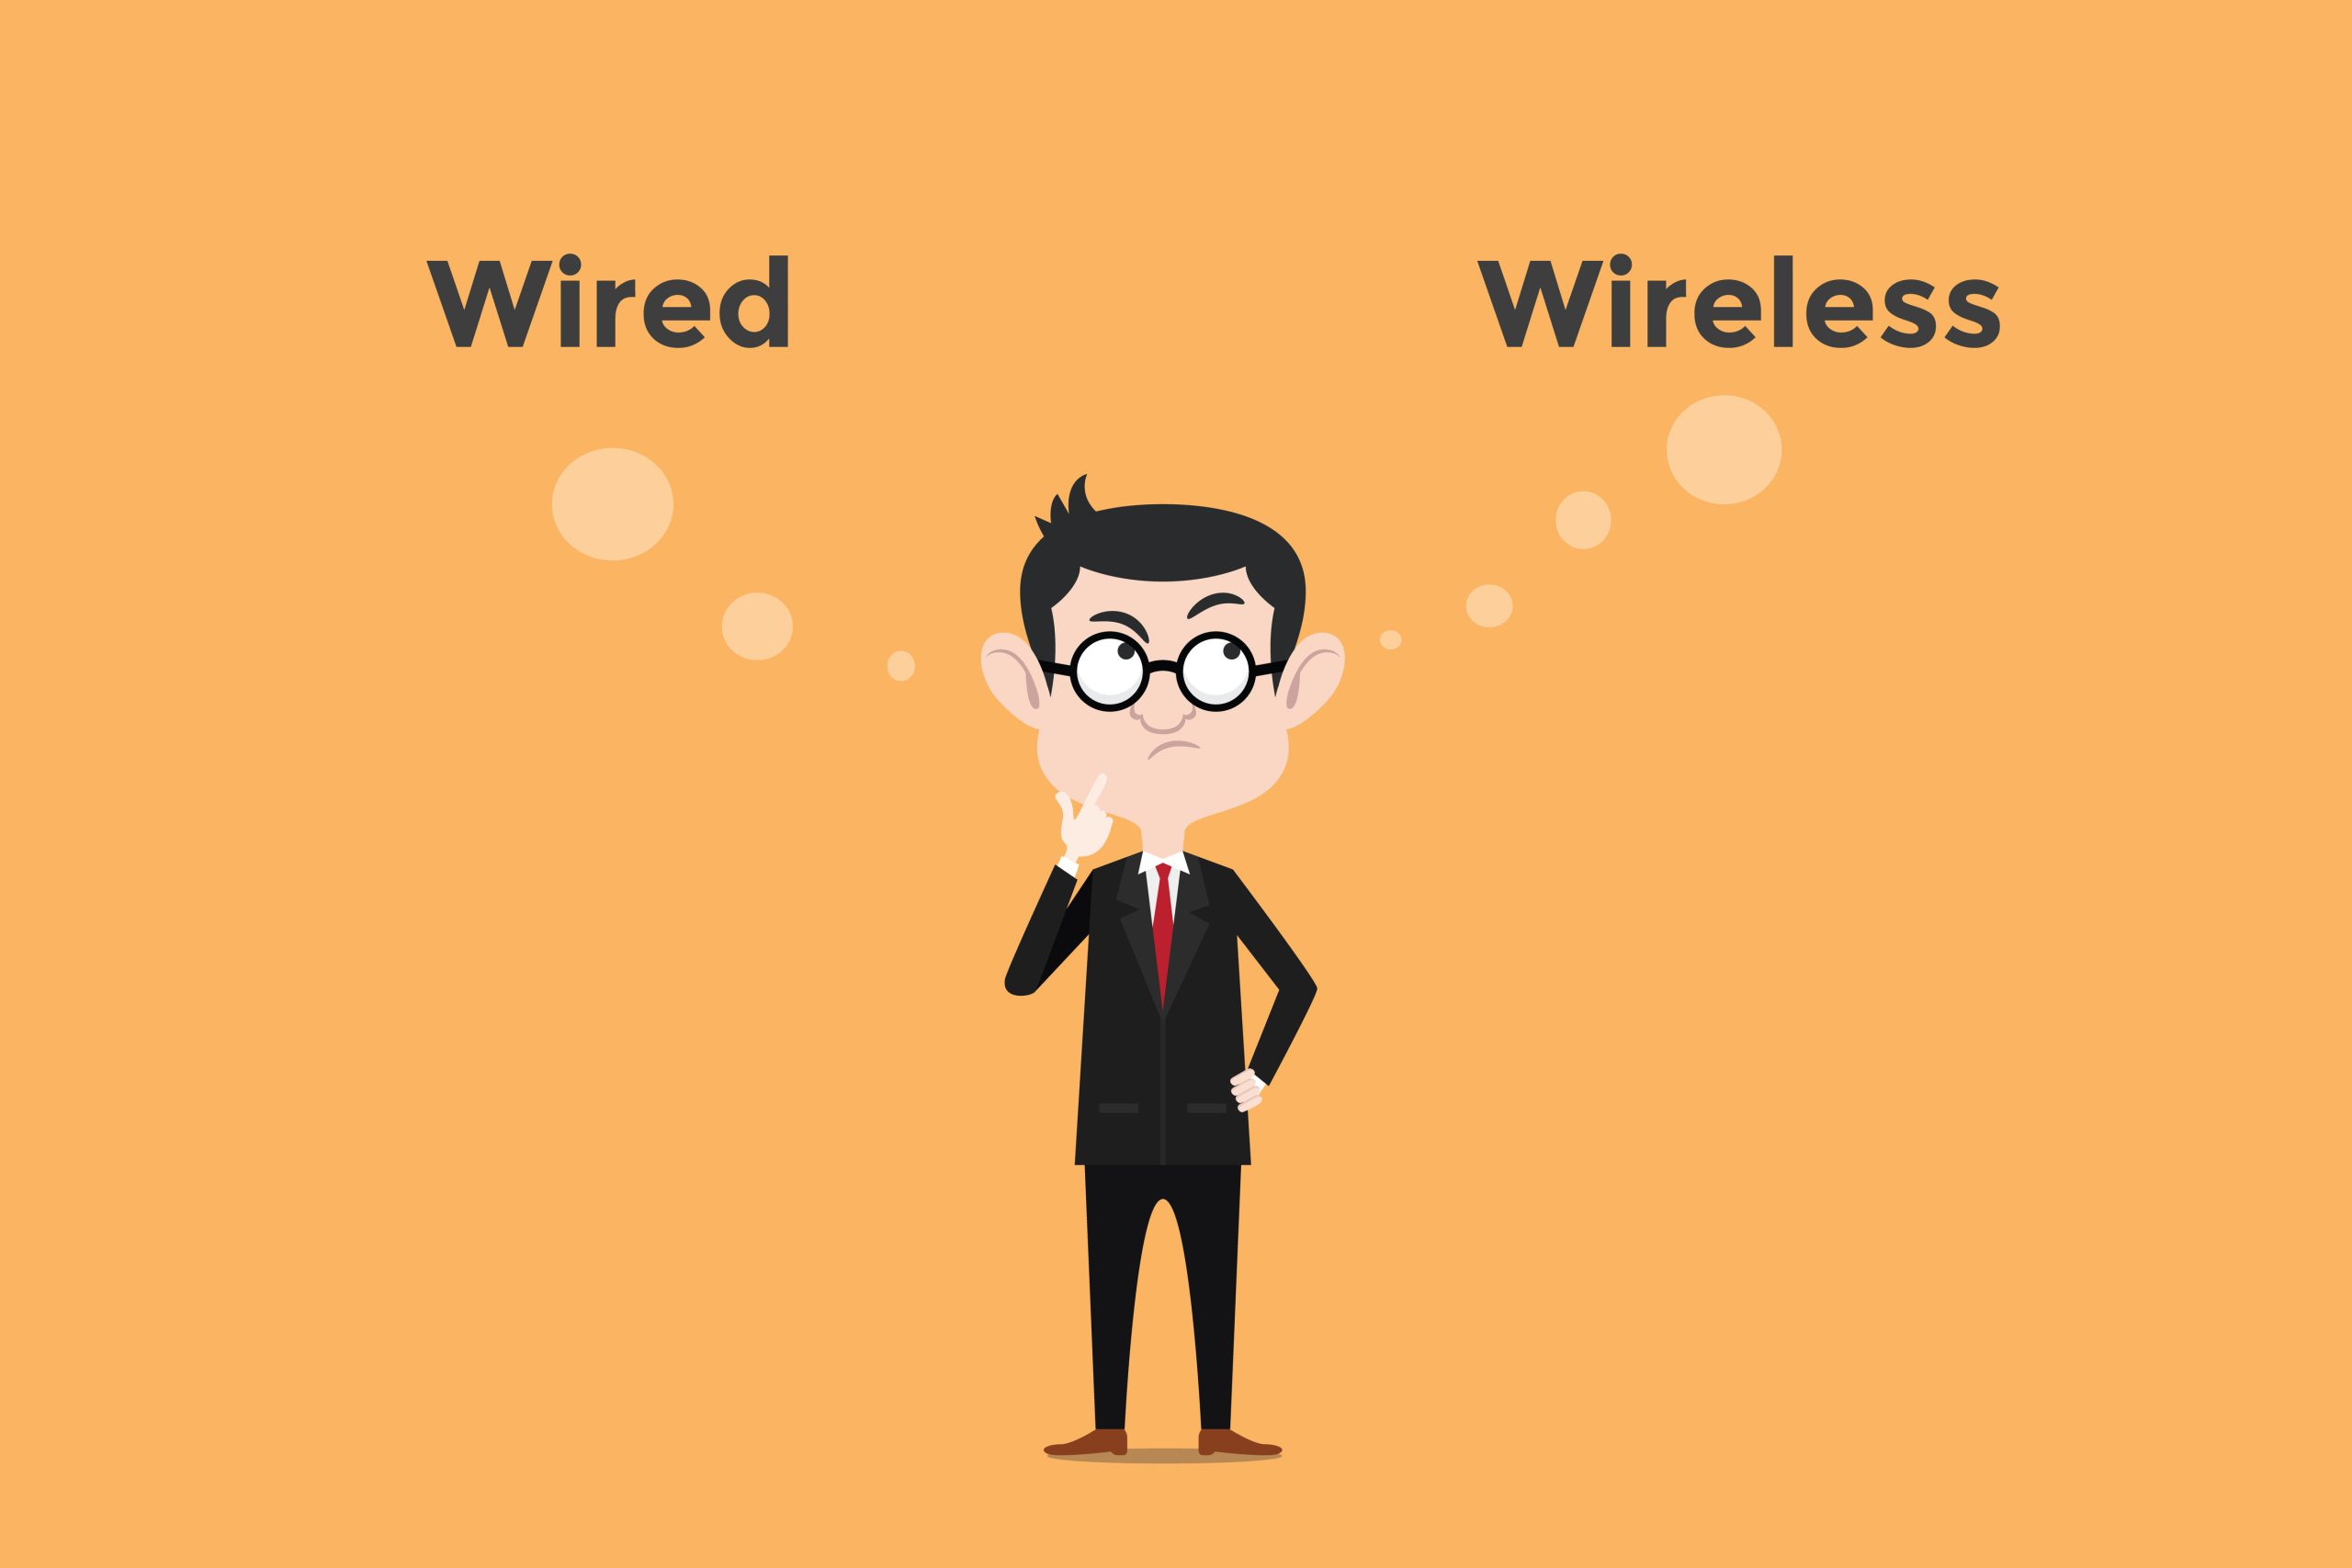 confuse to choose whether using wired vs wireless for internet connection in the office illustration with white bubble text